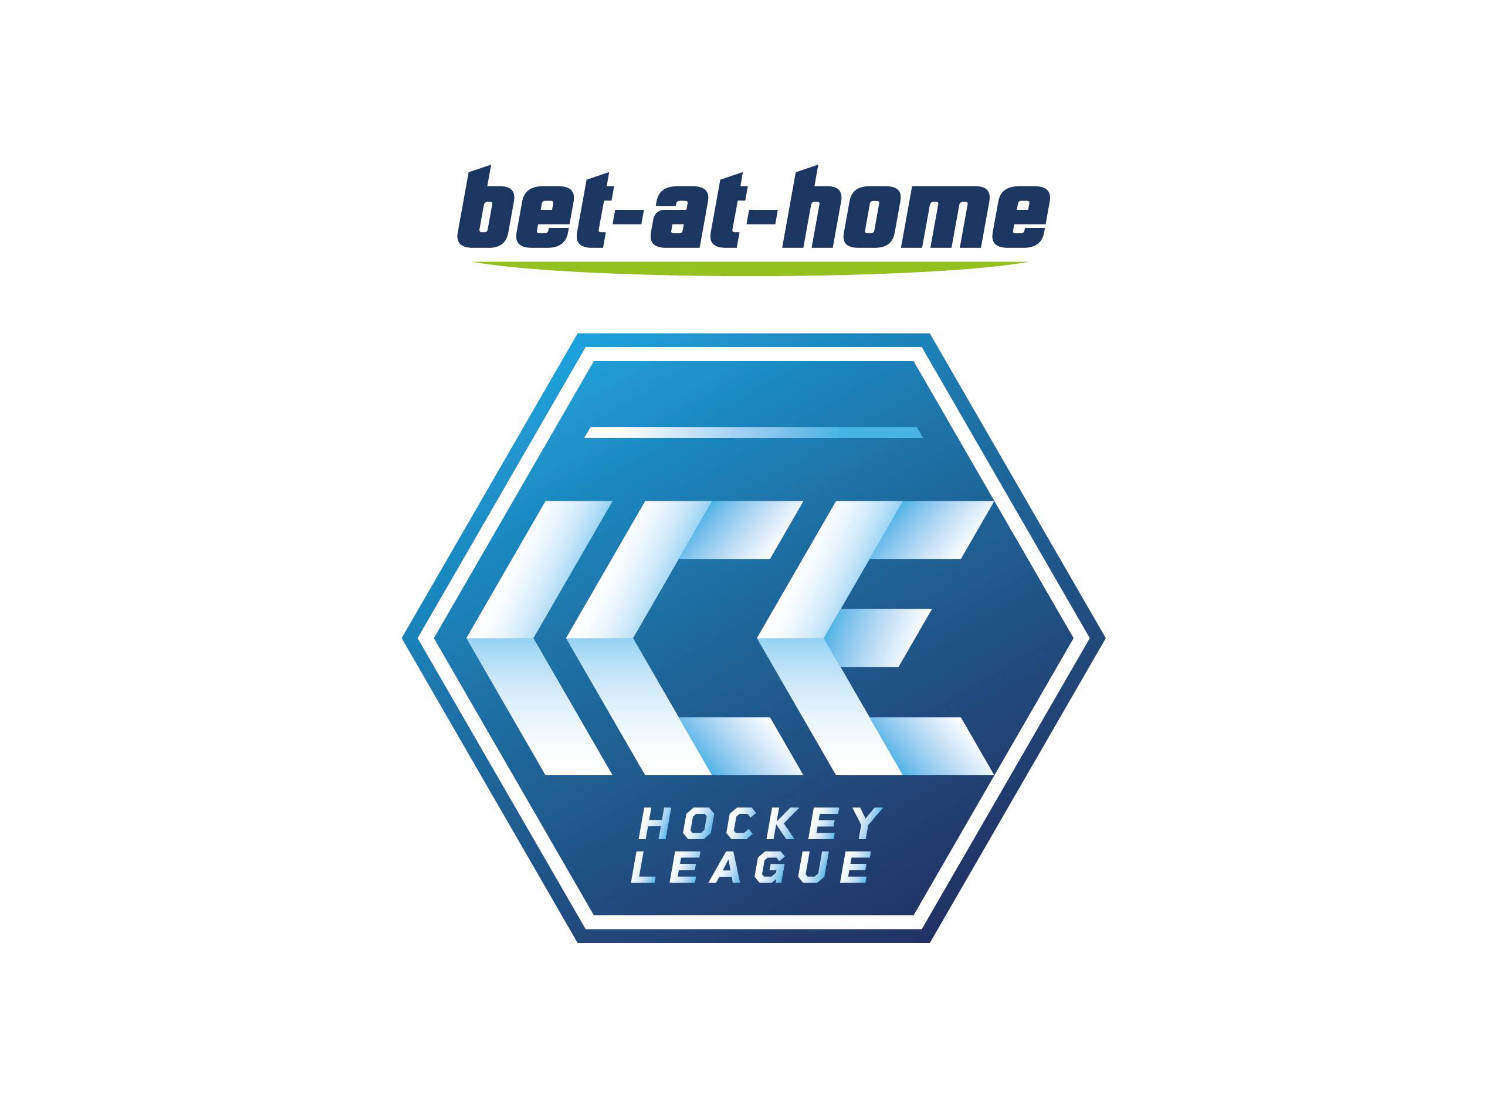 bet-at-home ICE Hockey League Logo, Quelle: bet-at-home ICE Hockey League